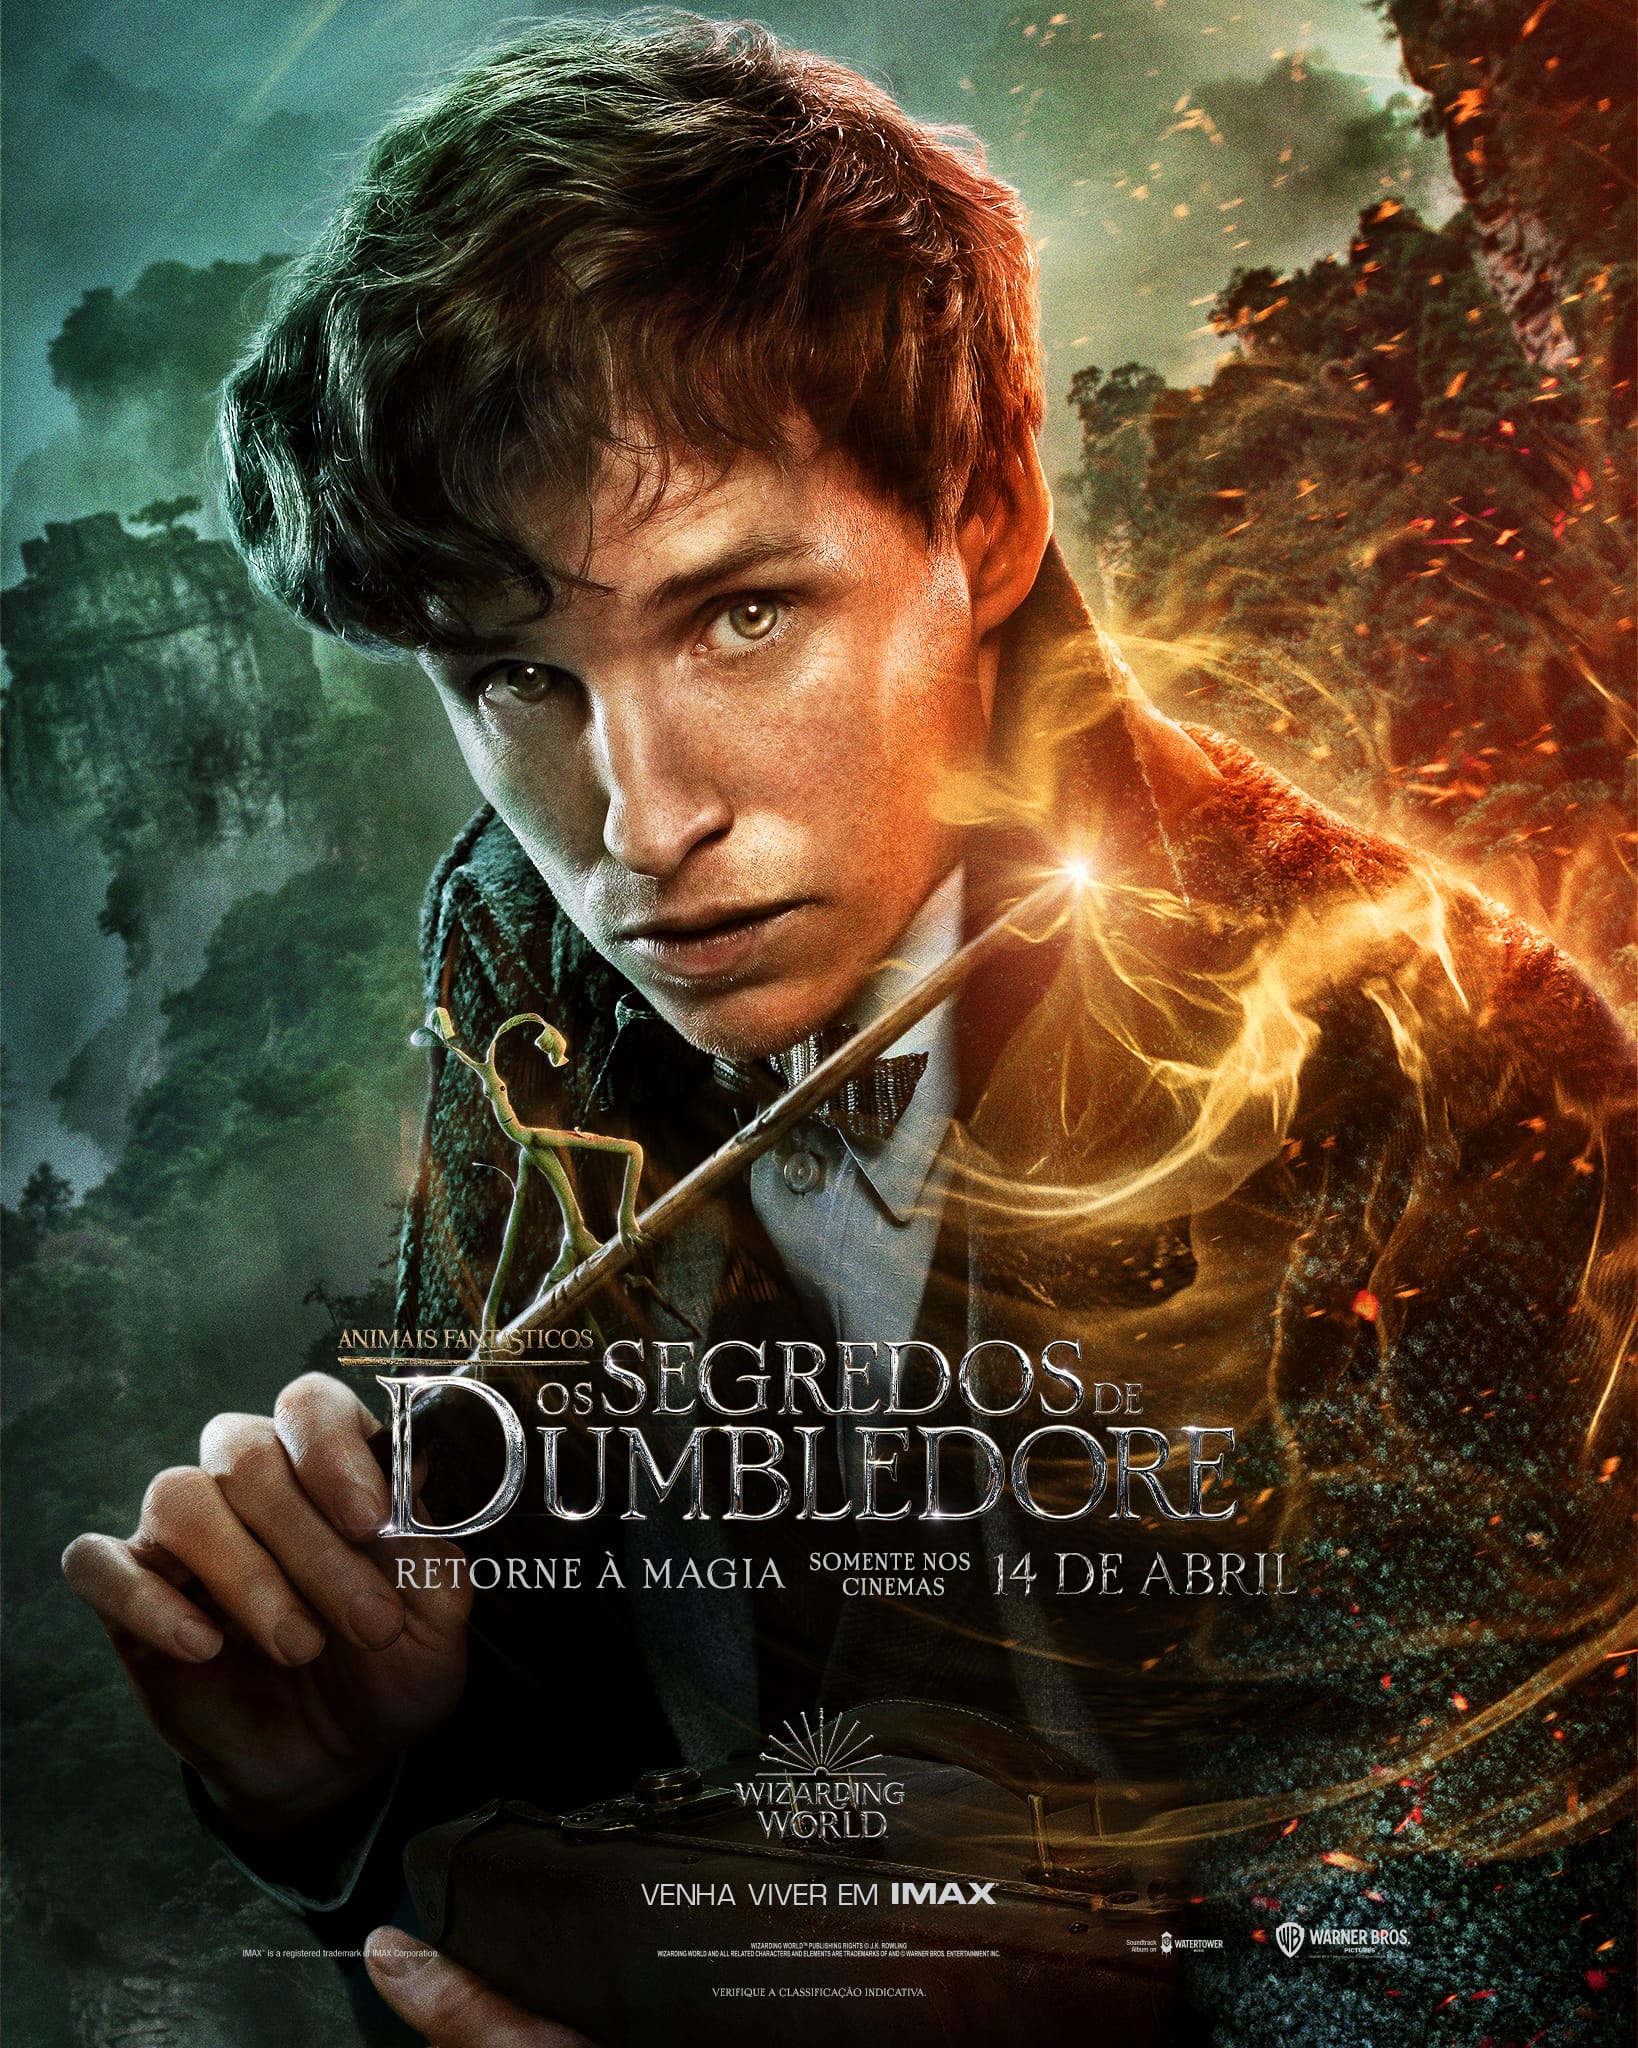 Eddie Redmayne as Newt Scamander wields a wand, where Pickett, the son of a, is standing. An orange spell can be seen illuminating the entire image. At the bottom of the image is written Fantastic Beasts: The Secrets of Dumbledore